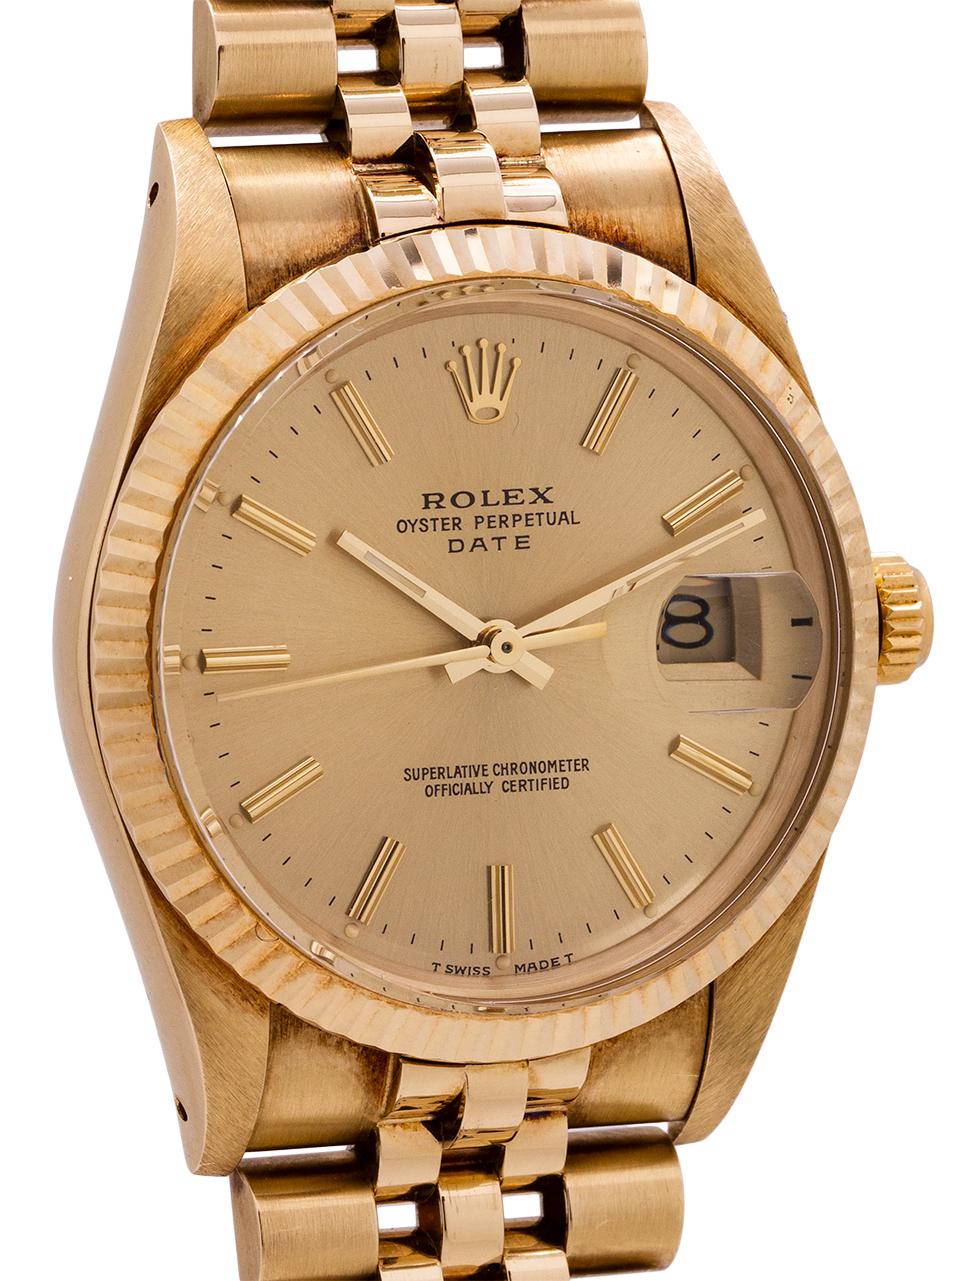 
An exceptional condition Rolex Oyster Perpetual Date ref 15037 serial # 9.1 million circa 1986. Featuring 34mm diameter case with fluted bezel, acrylic crystal, and original champagne dial with applied gold indexes and gilt baton hands. Powered by